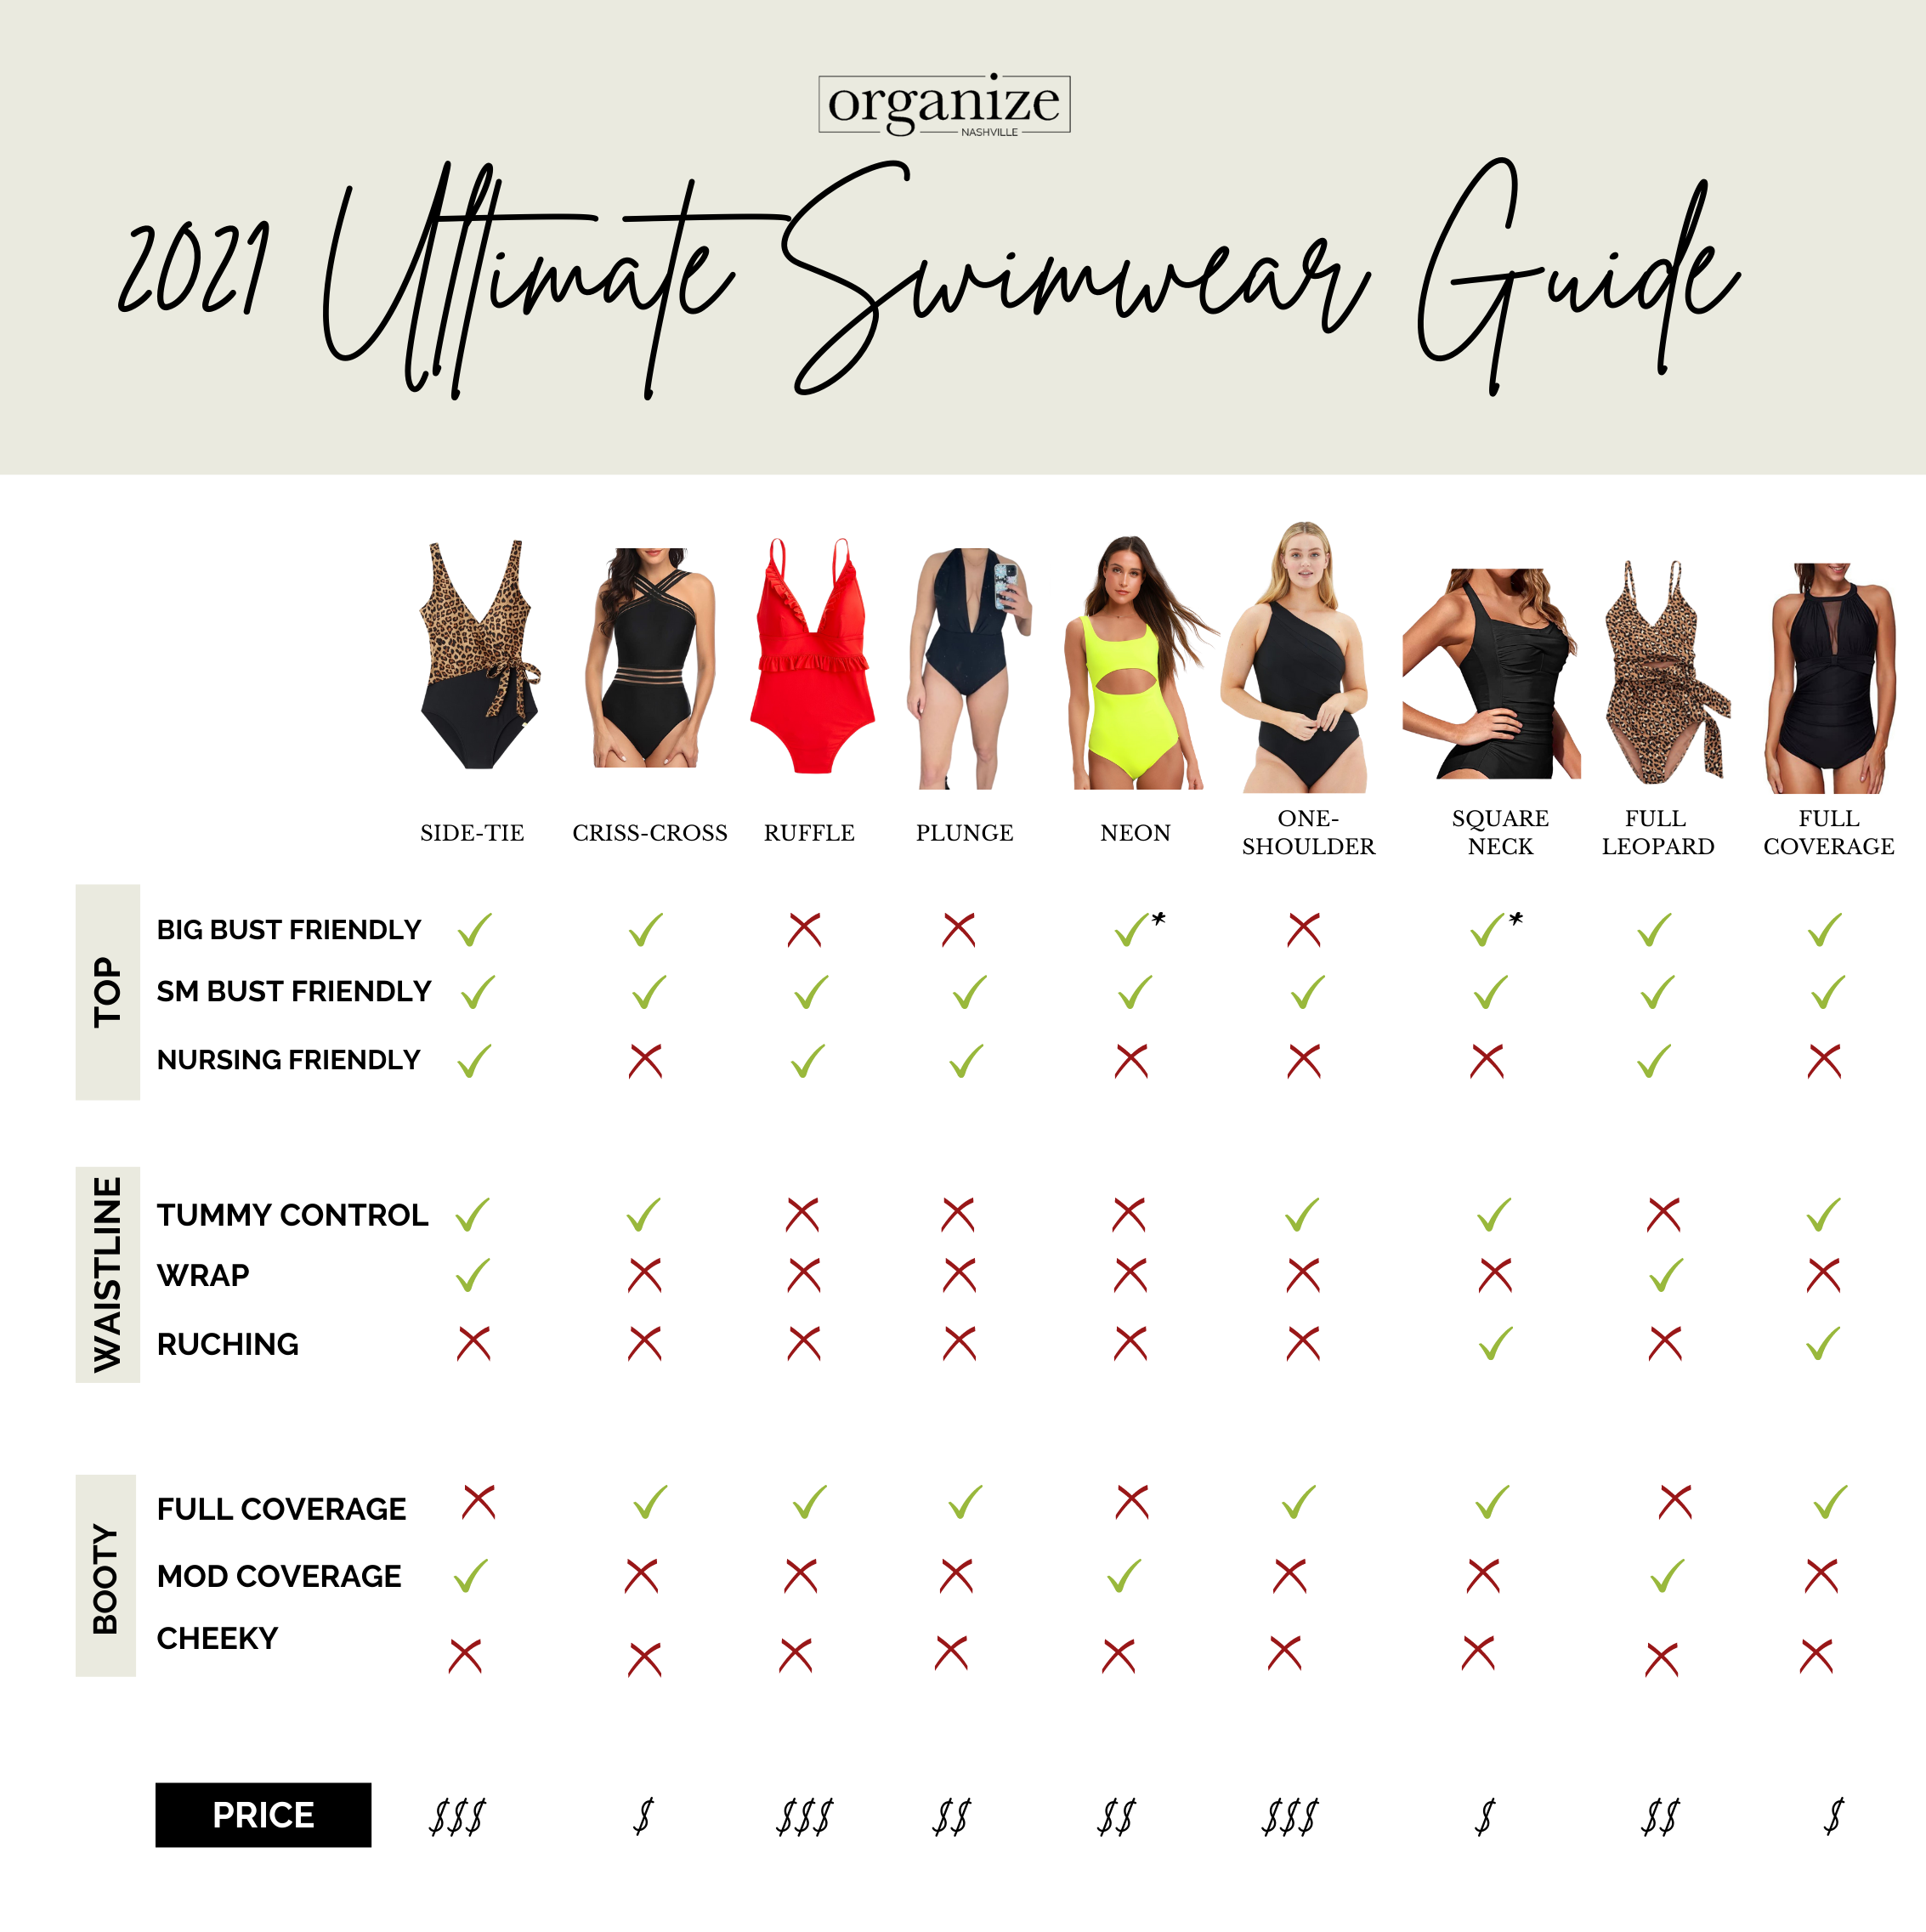 Types of Swimsuits, The Ultimate Swimwear Guide